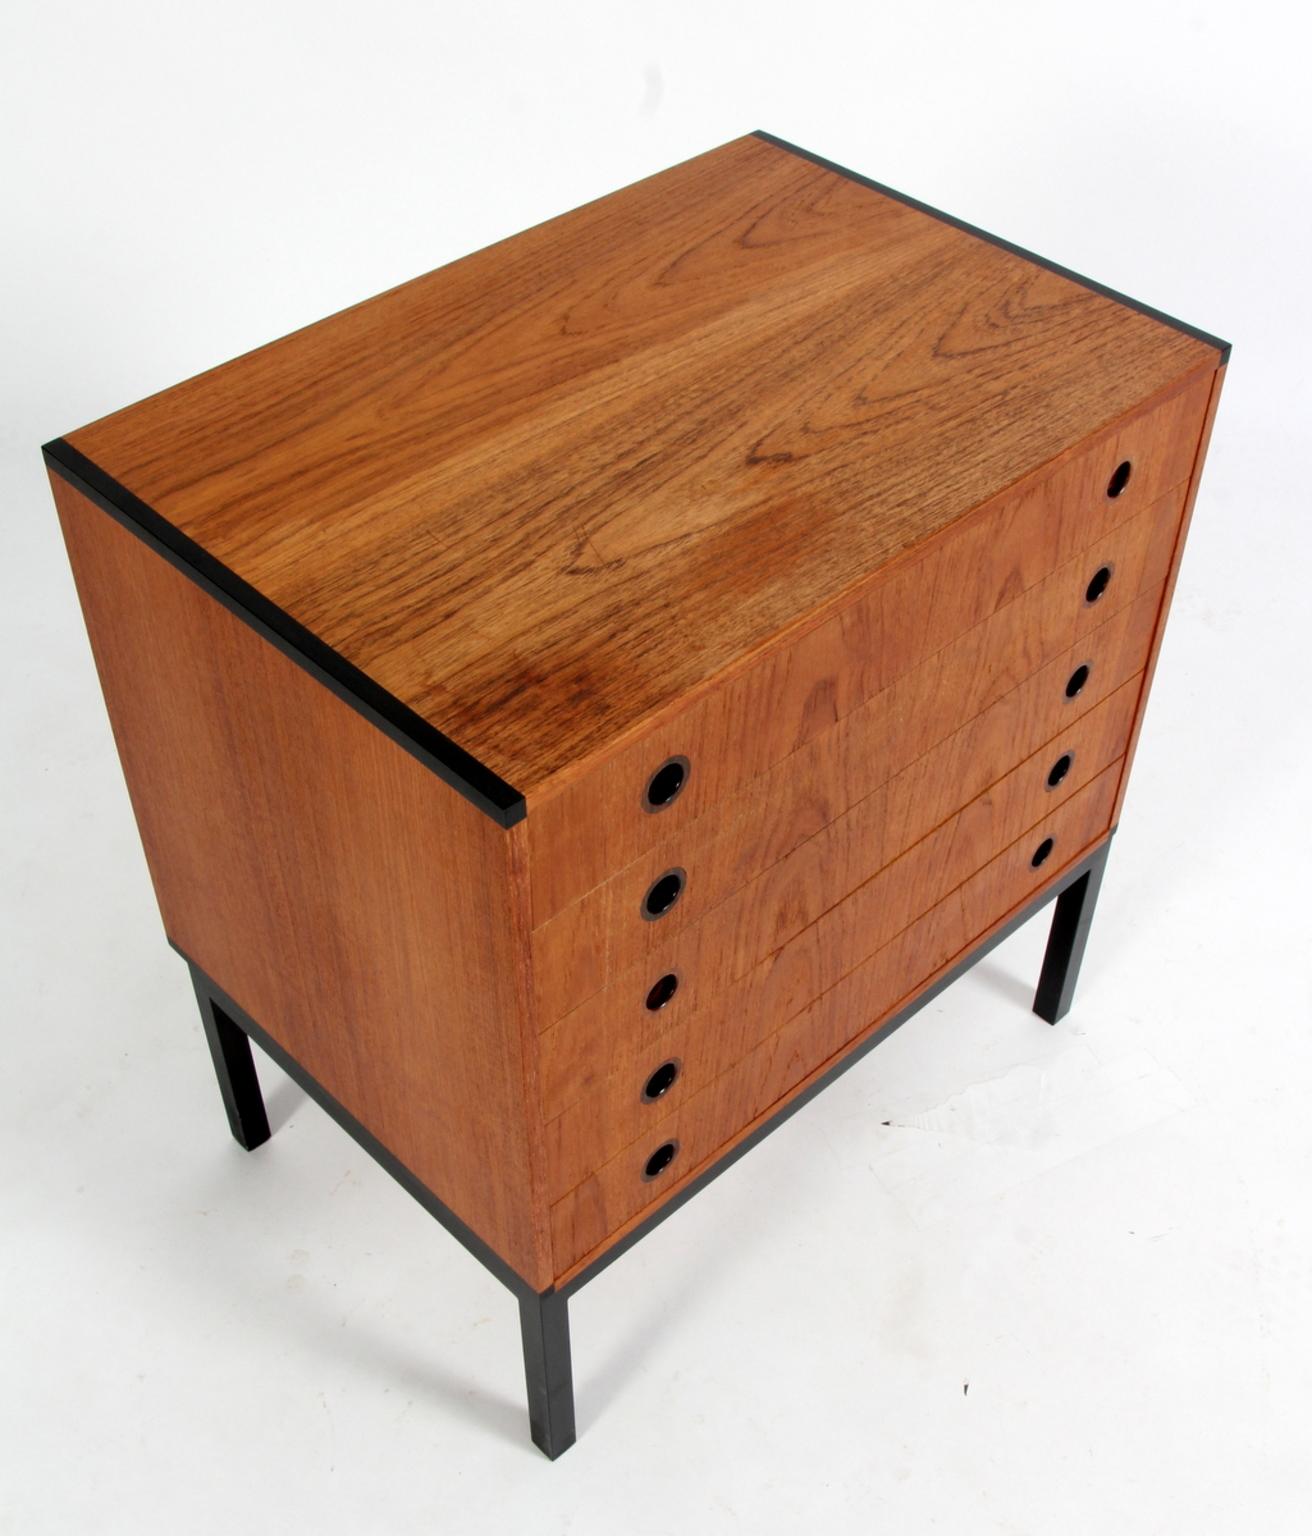 Kai Kristiansen for Aksel Kjersgaard, attributed, dresser with 5 drawers.

Made of teak and ivory tree. Handles of rosewood.

Base of black laquered steel.

Fantastic drawer with impressive details. 

One minor professional repair.